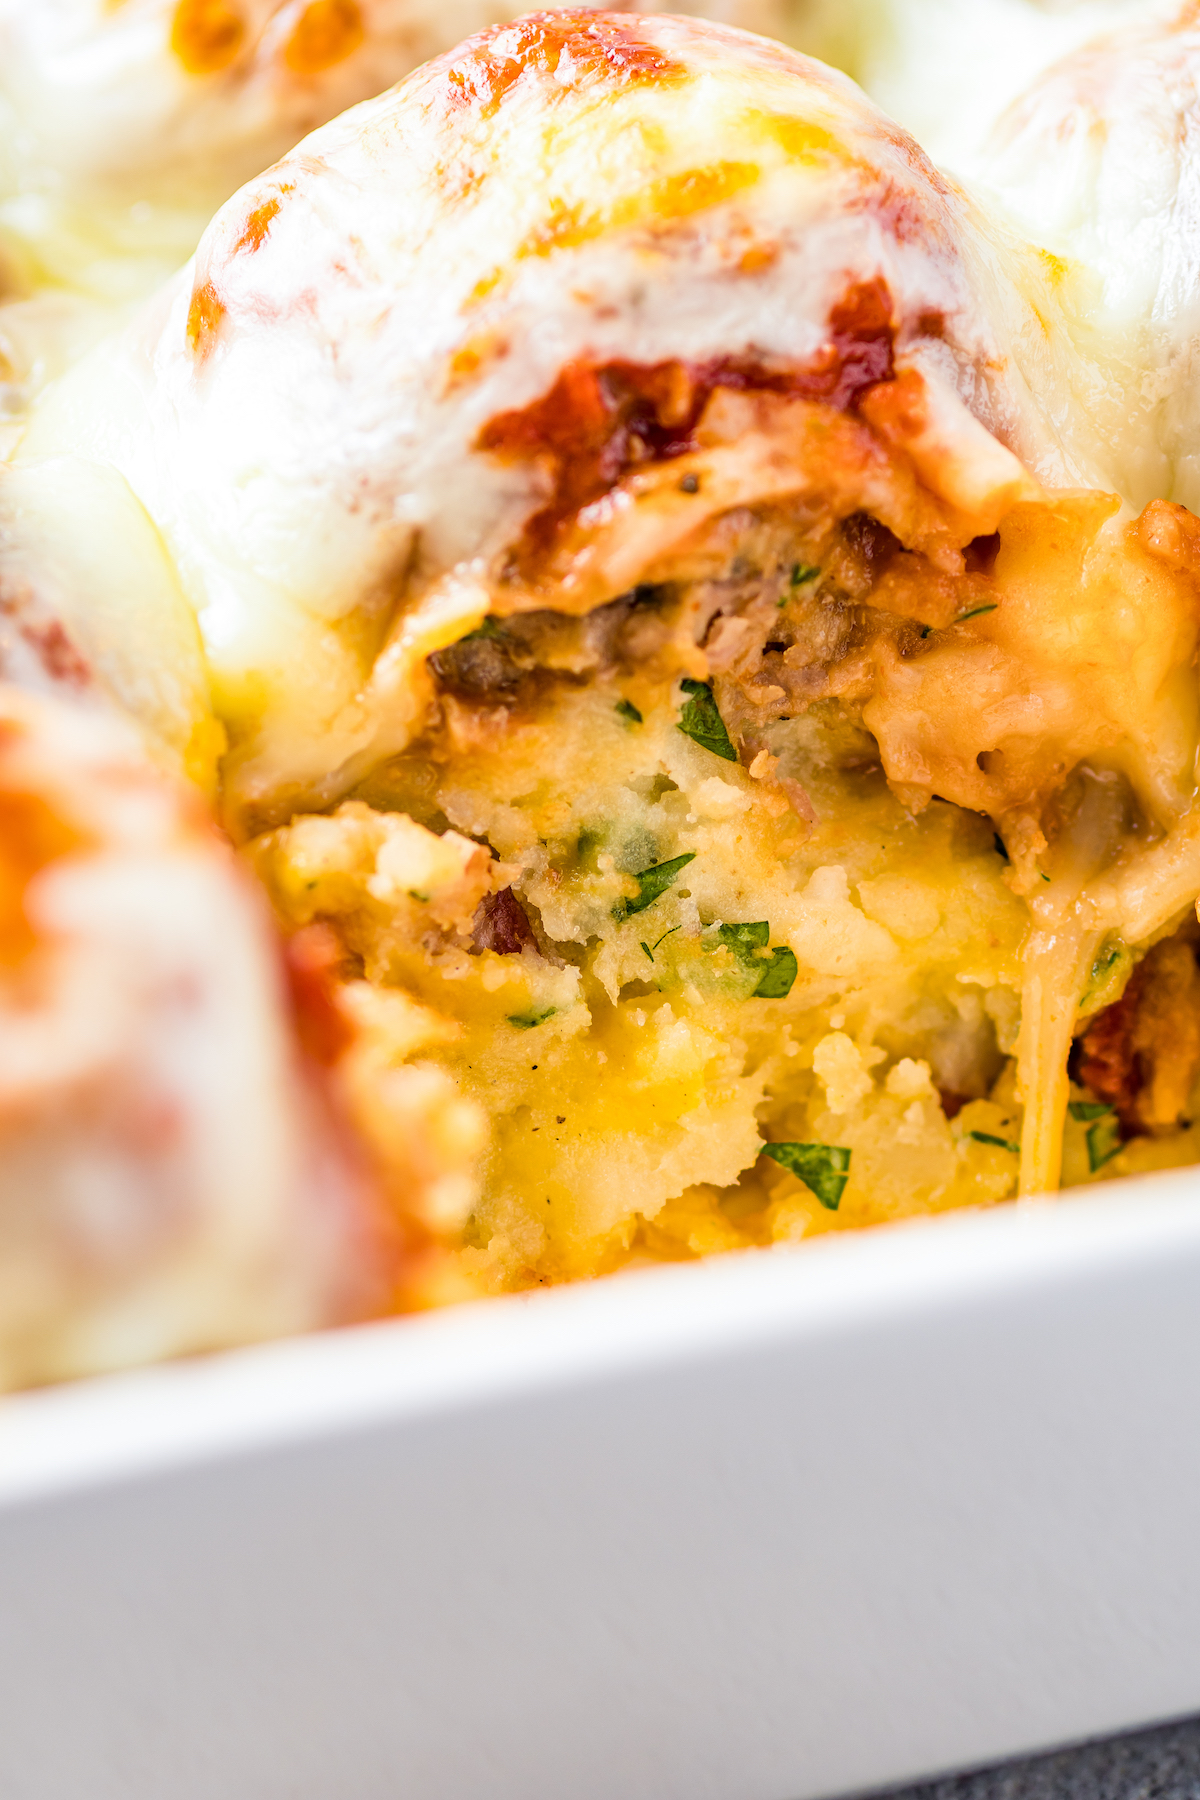 Close-up shot of a loaded mashed potato and meatball casserole, with one serving taken out to show texture.